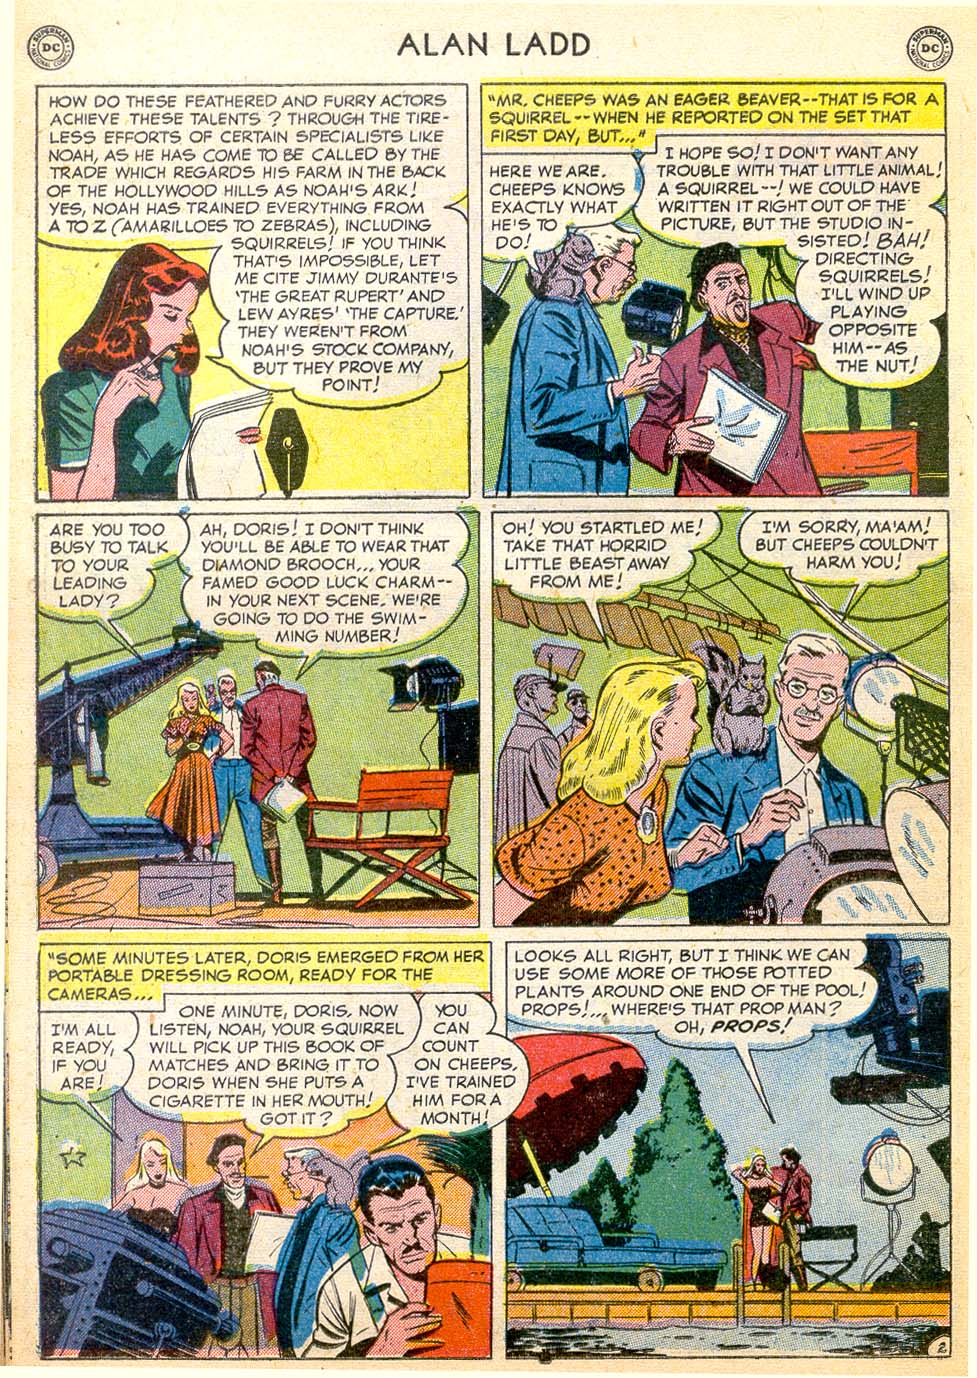 Read online Adventures of Alan Ladd comic -  Issue #9 - 32